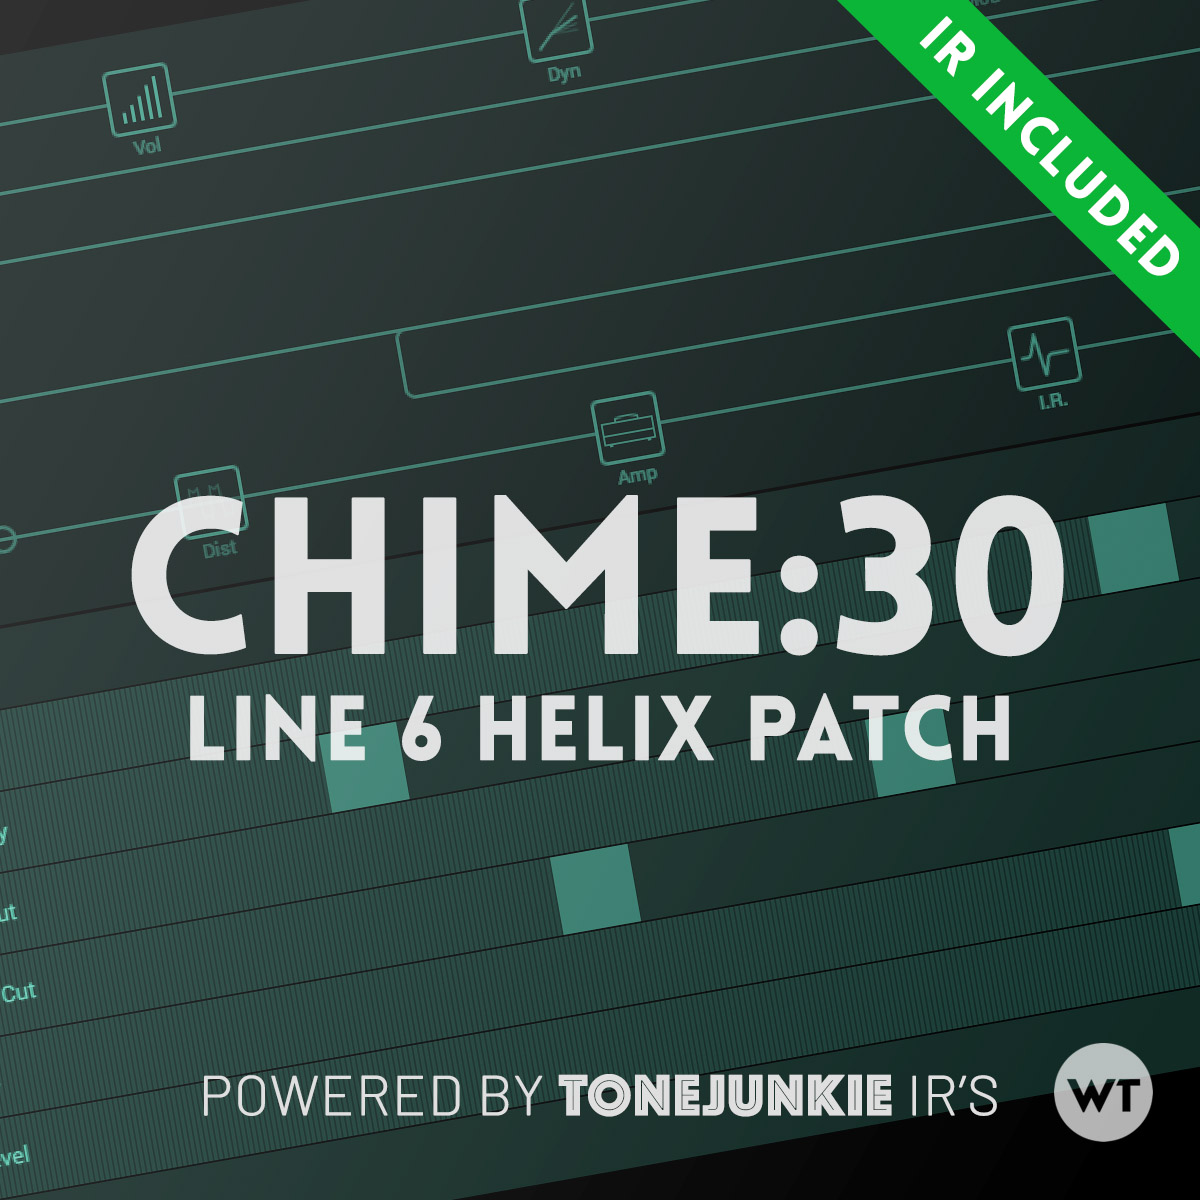 Chime 30 Line 6 Helix Patch Worship Tutorials